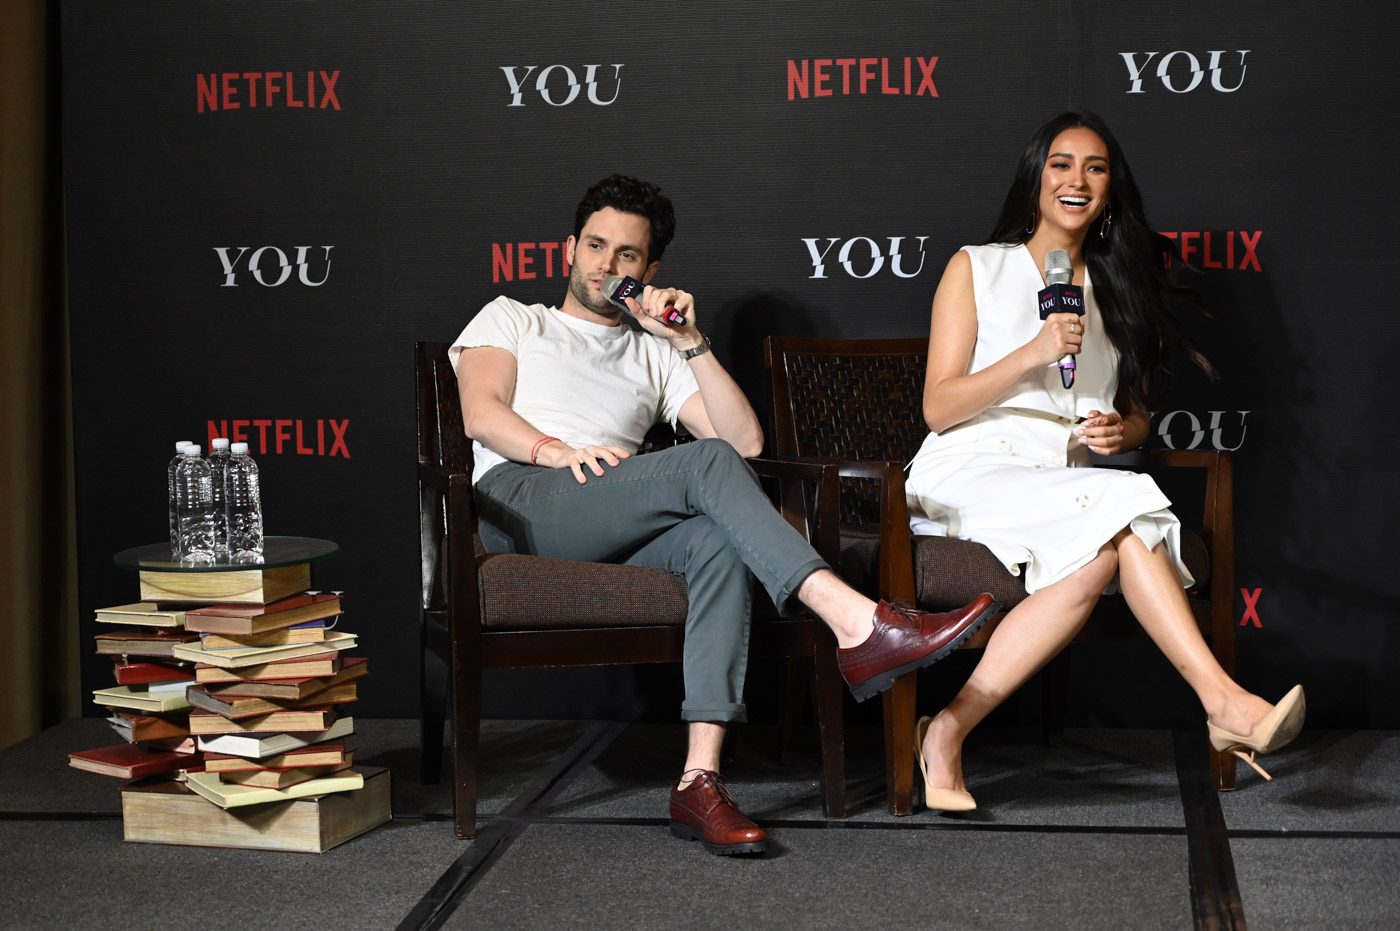 Here’s what Penn Badgley and Shay Mitchell think of each other’s character in ‘You’